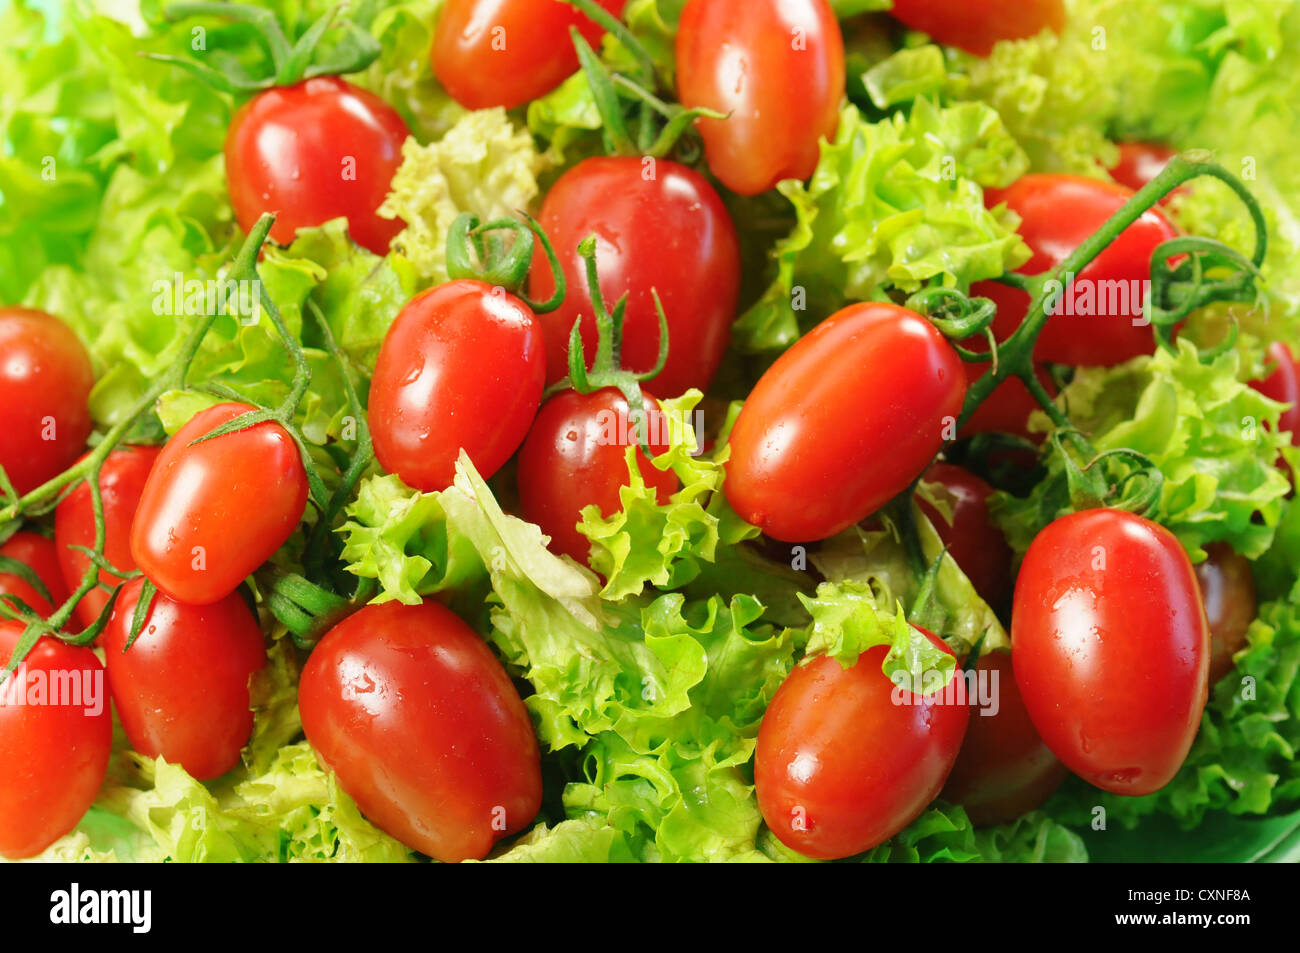 Tomatoes and salad leaves Stock Photo